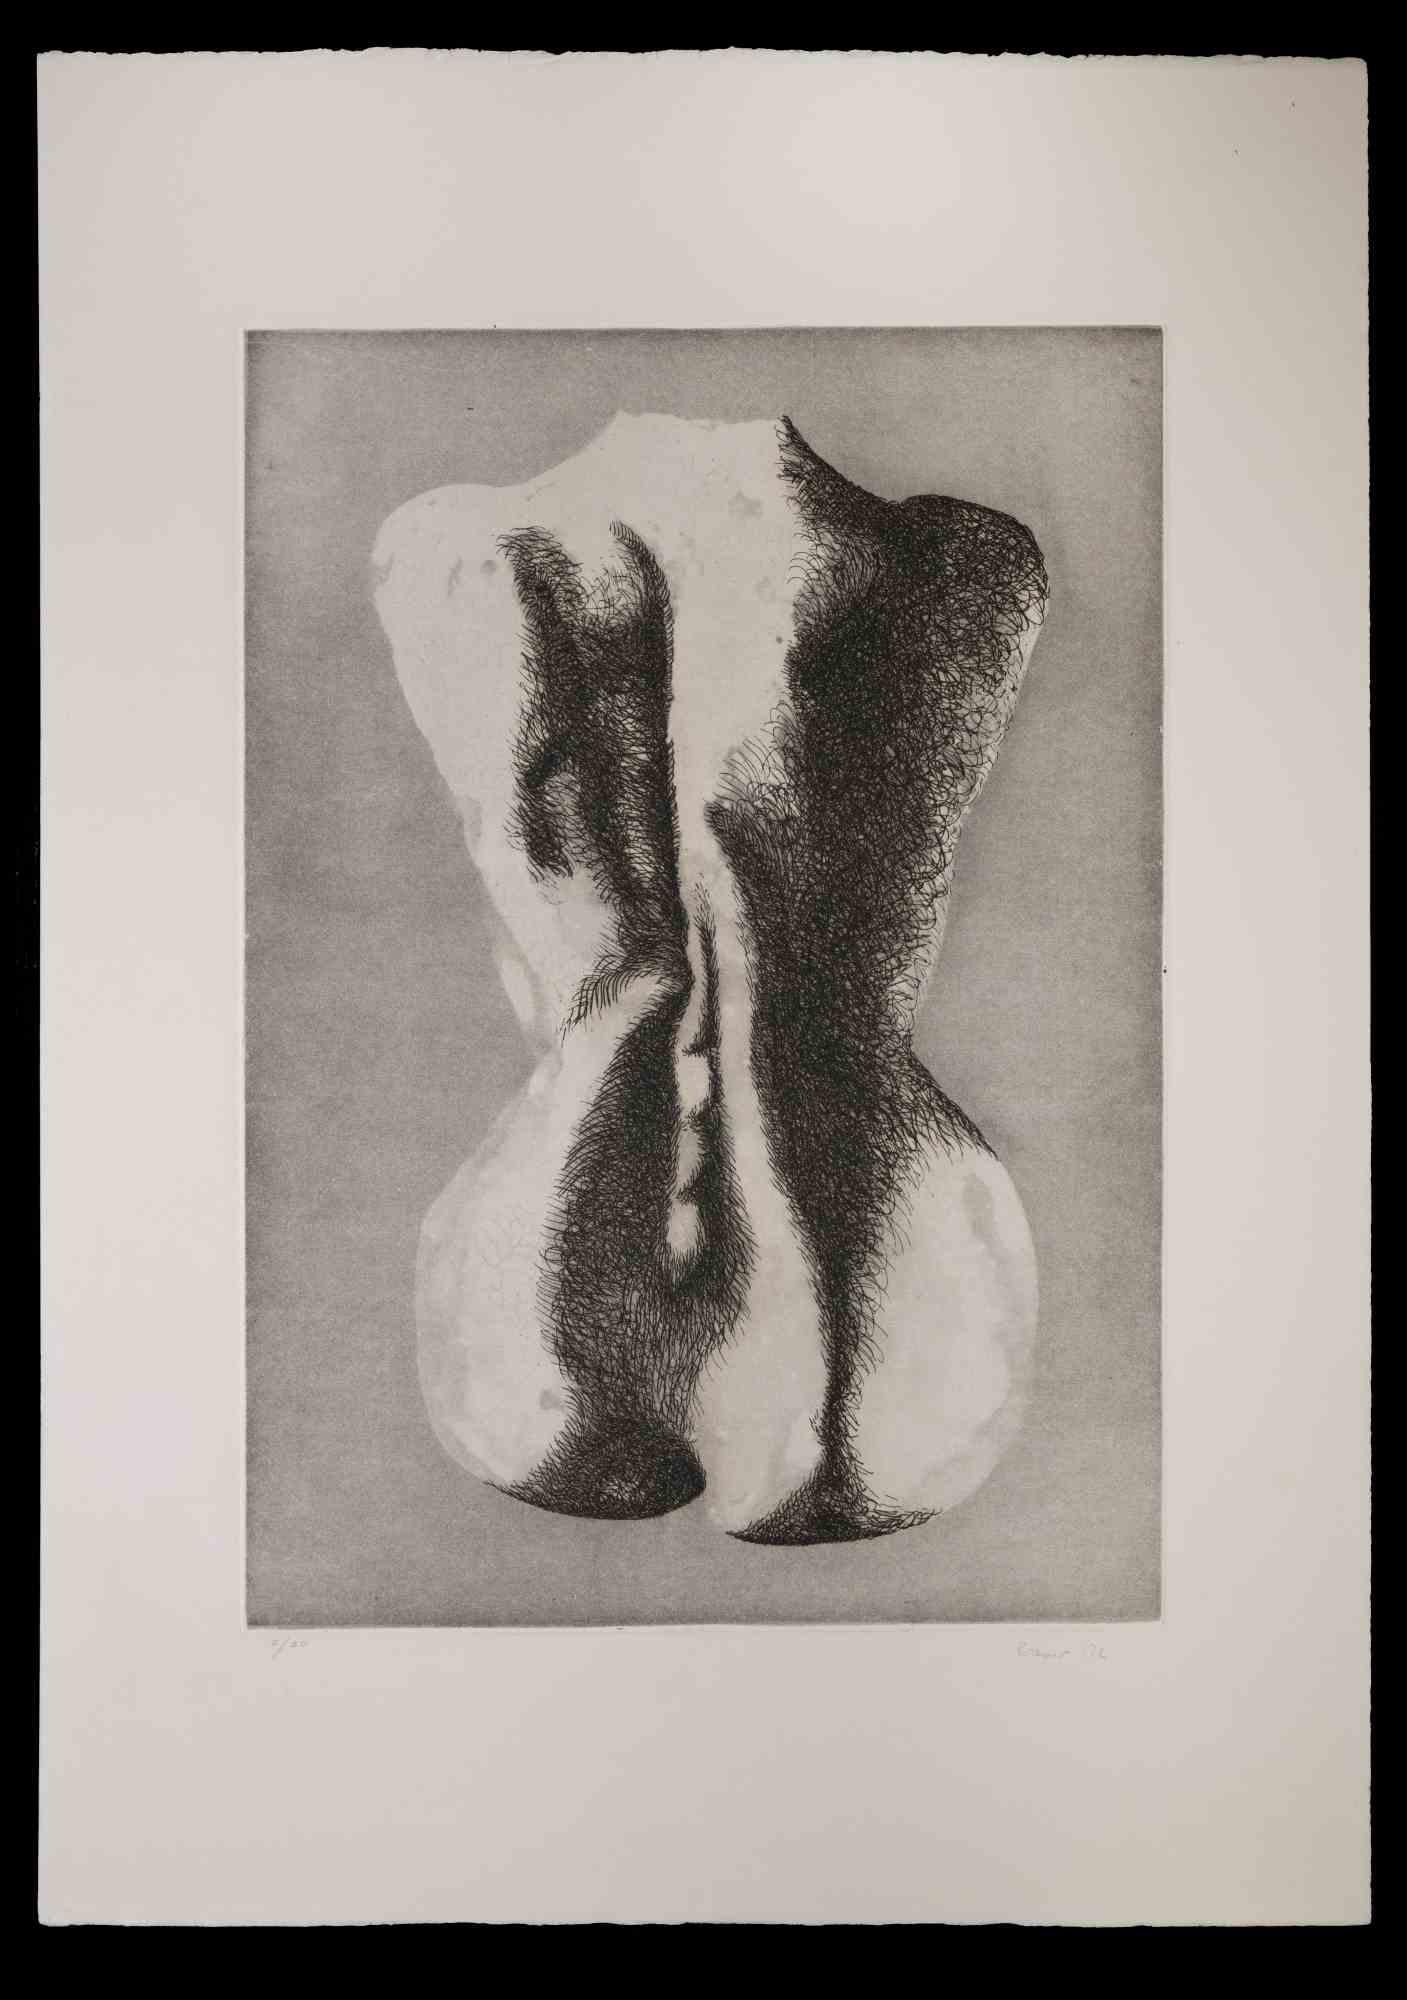 Woman from the Back is an etching on paper, realized by the Italian artist Giacomo Porzano (1925-2006).

Hand-signed on the lower right.

Numbered on the lower left. Edition of 50.

This contemporary piece representing the back of a nude woman, with